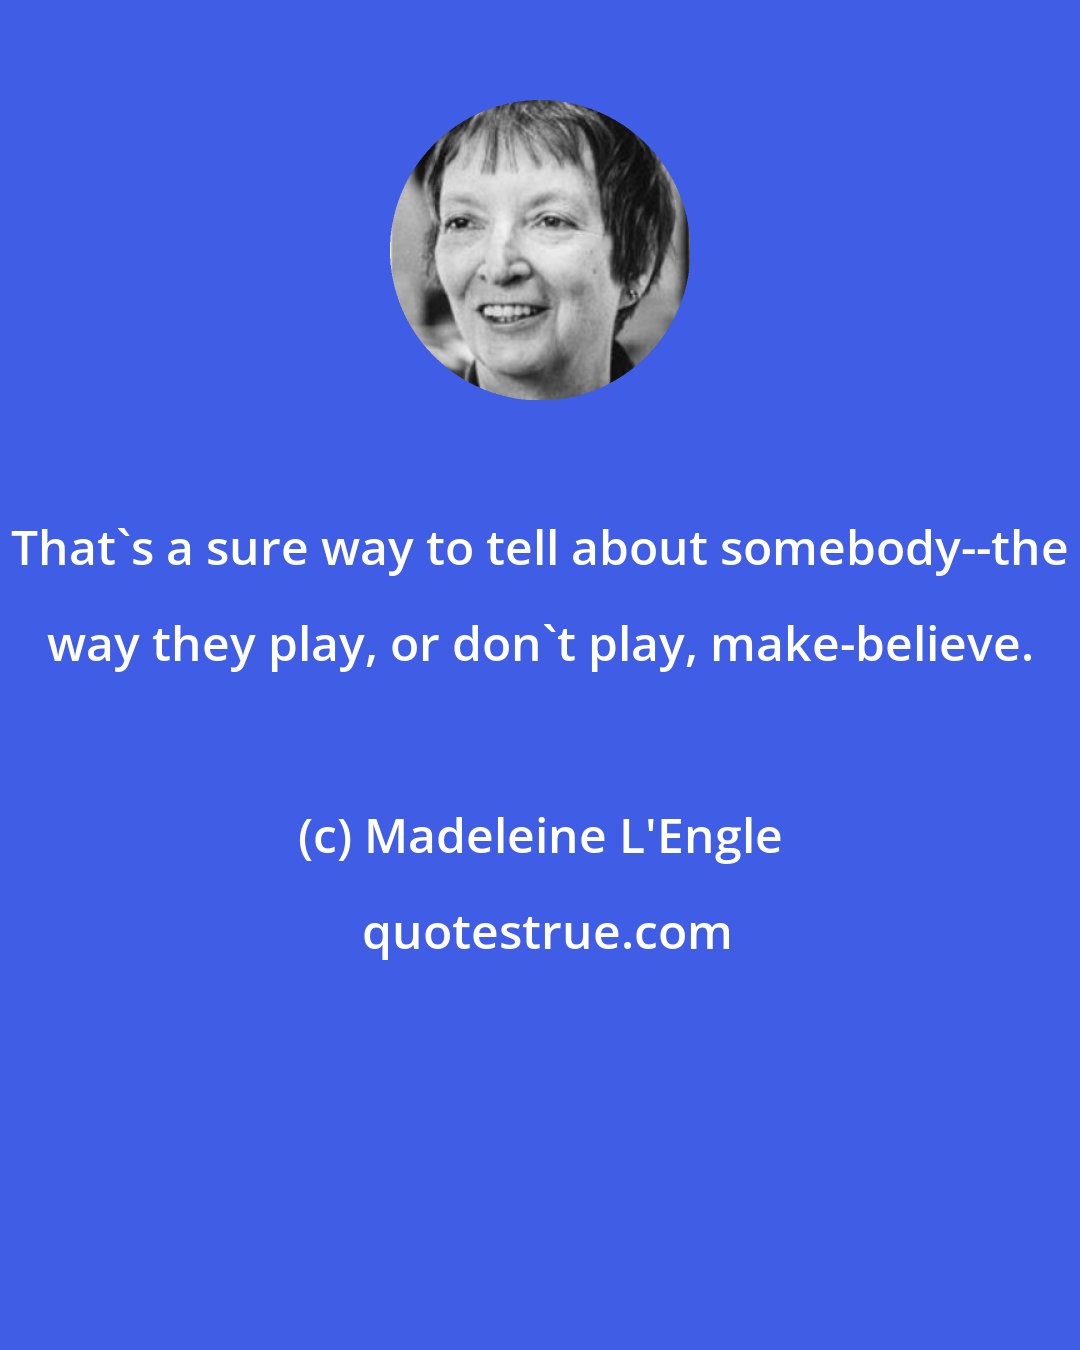 Madeleine L'Engle: That's a sure way to tell about somebody--the way they play, or don't play, make-believe.